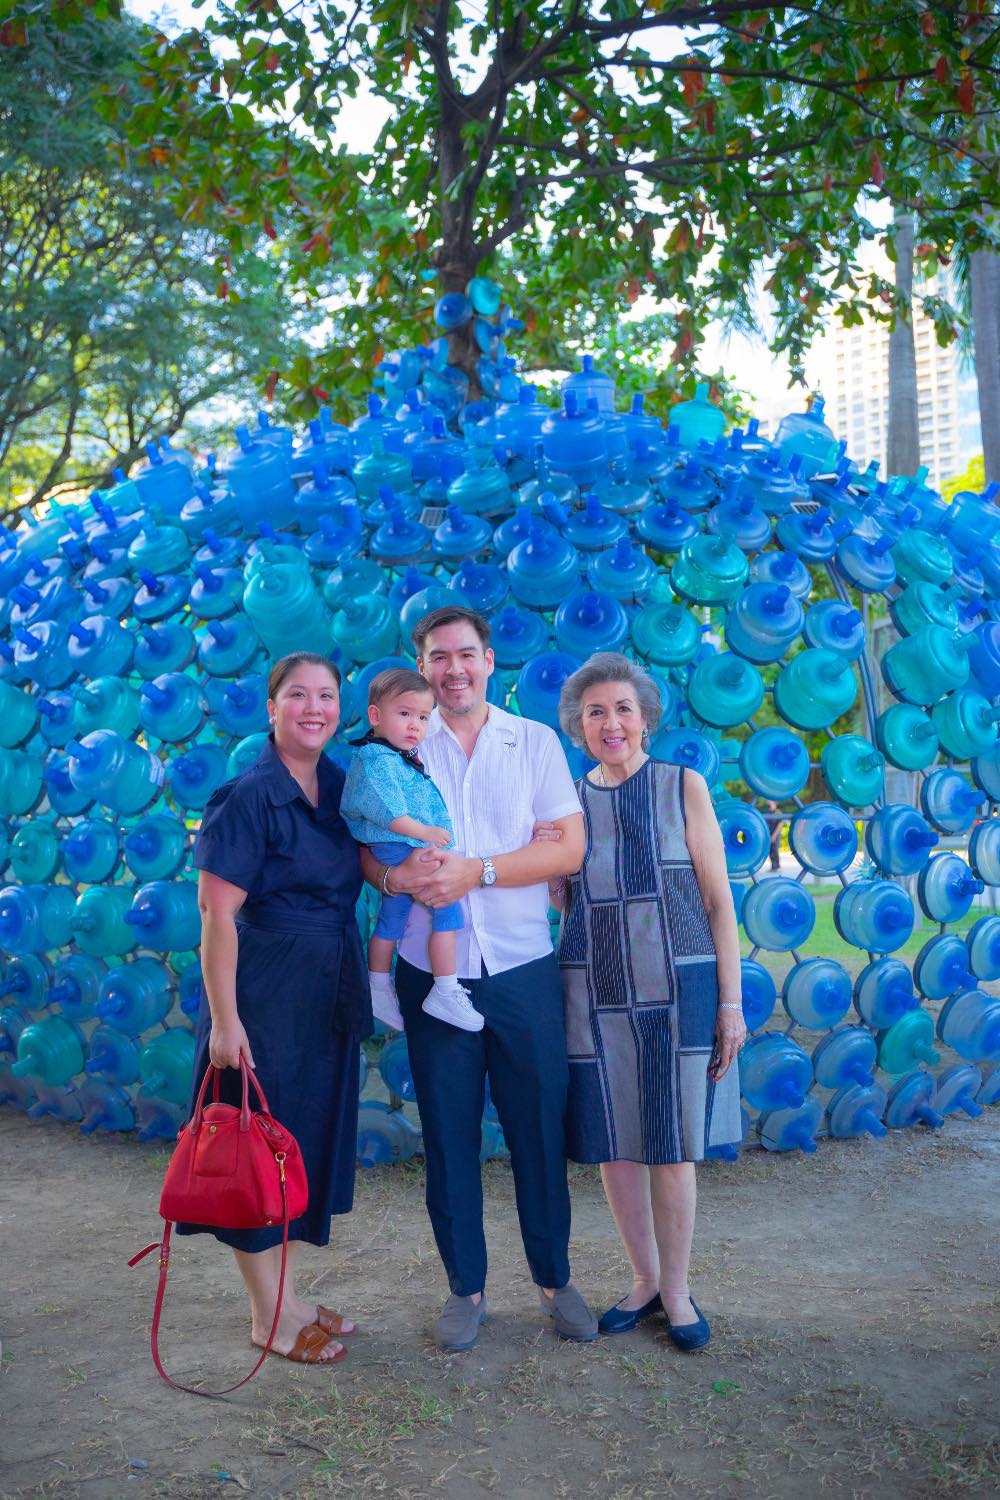 The Art House president and CEO Juan Carlos Pineda with family